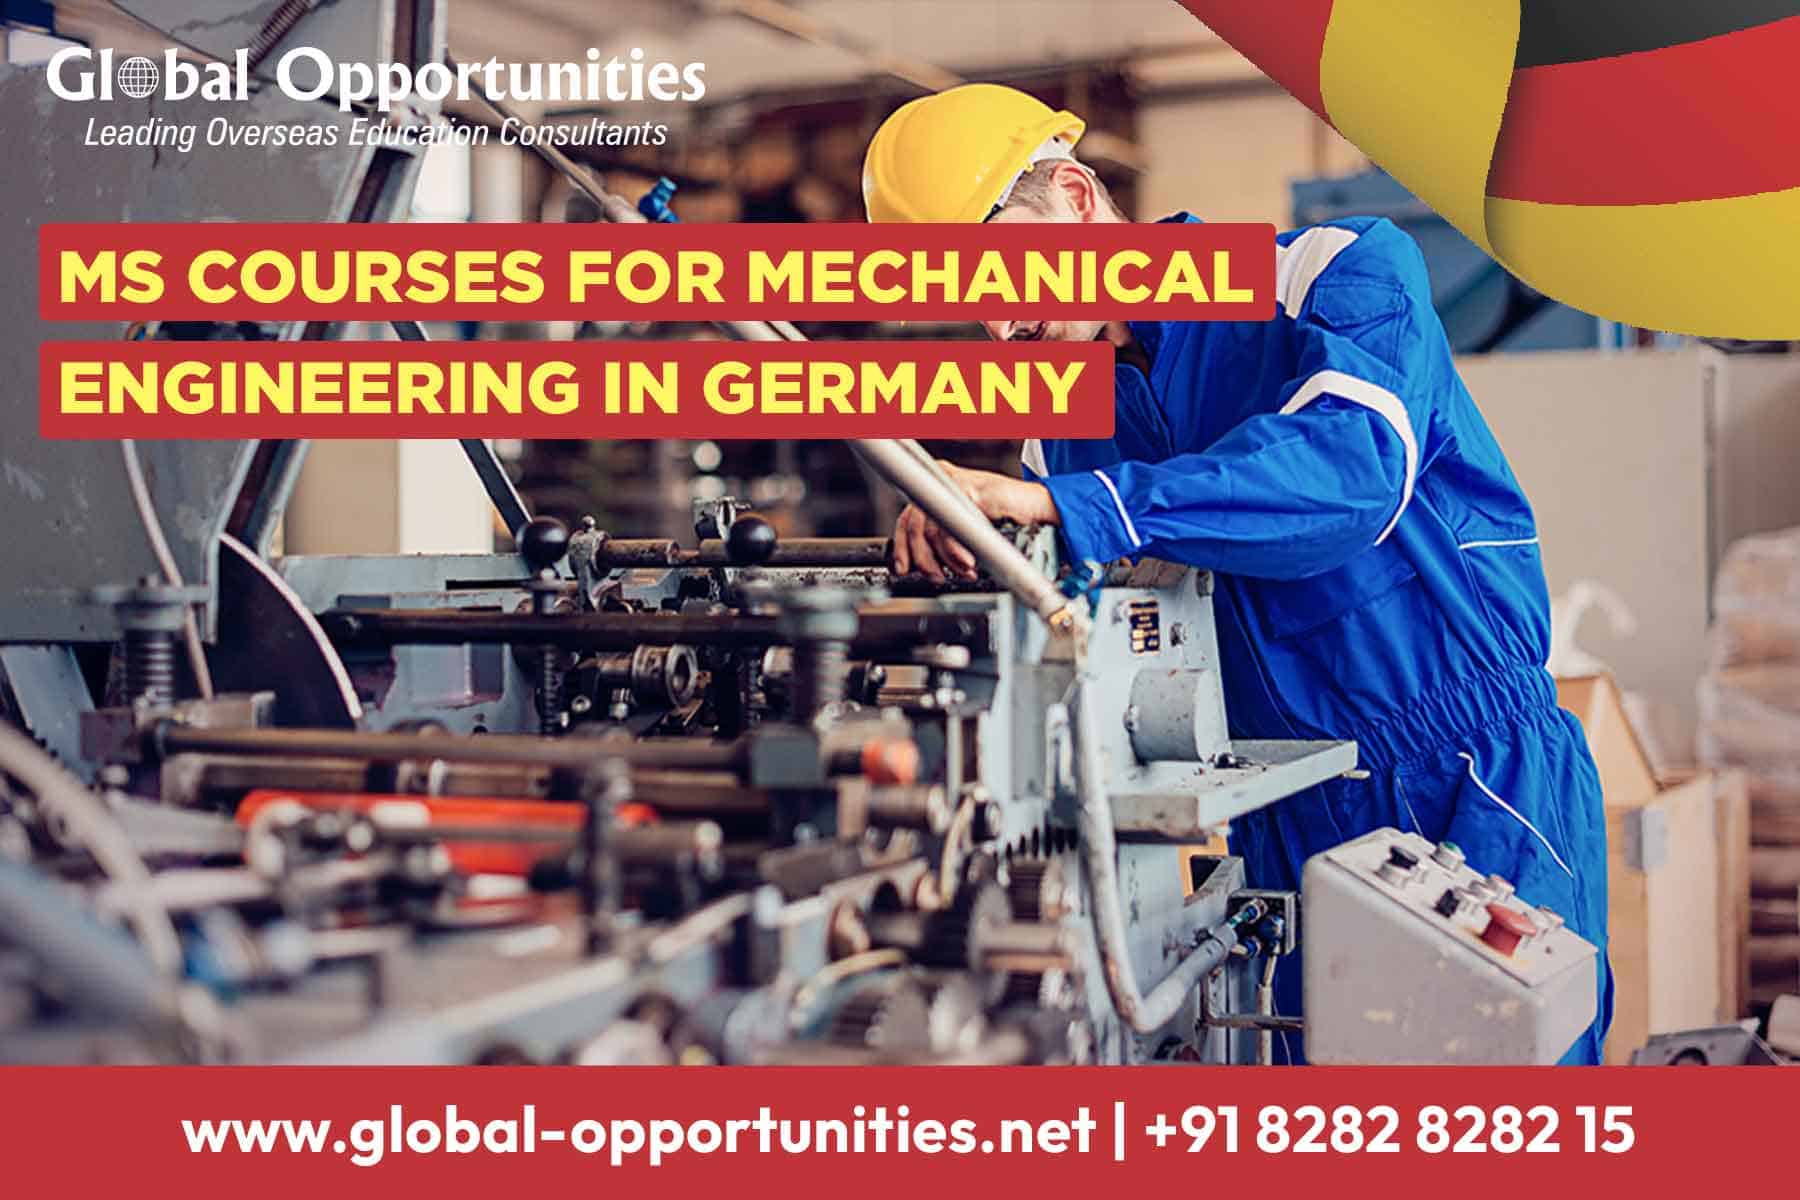 MS Courses for Mechanical Engineering in Germany